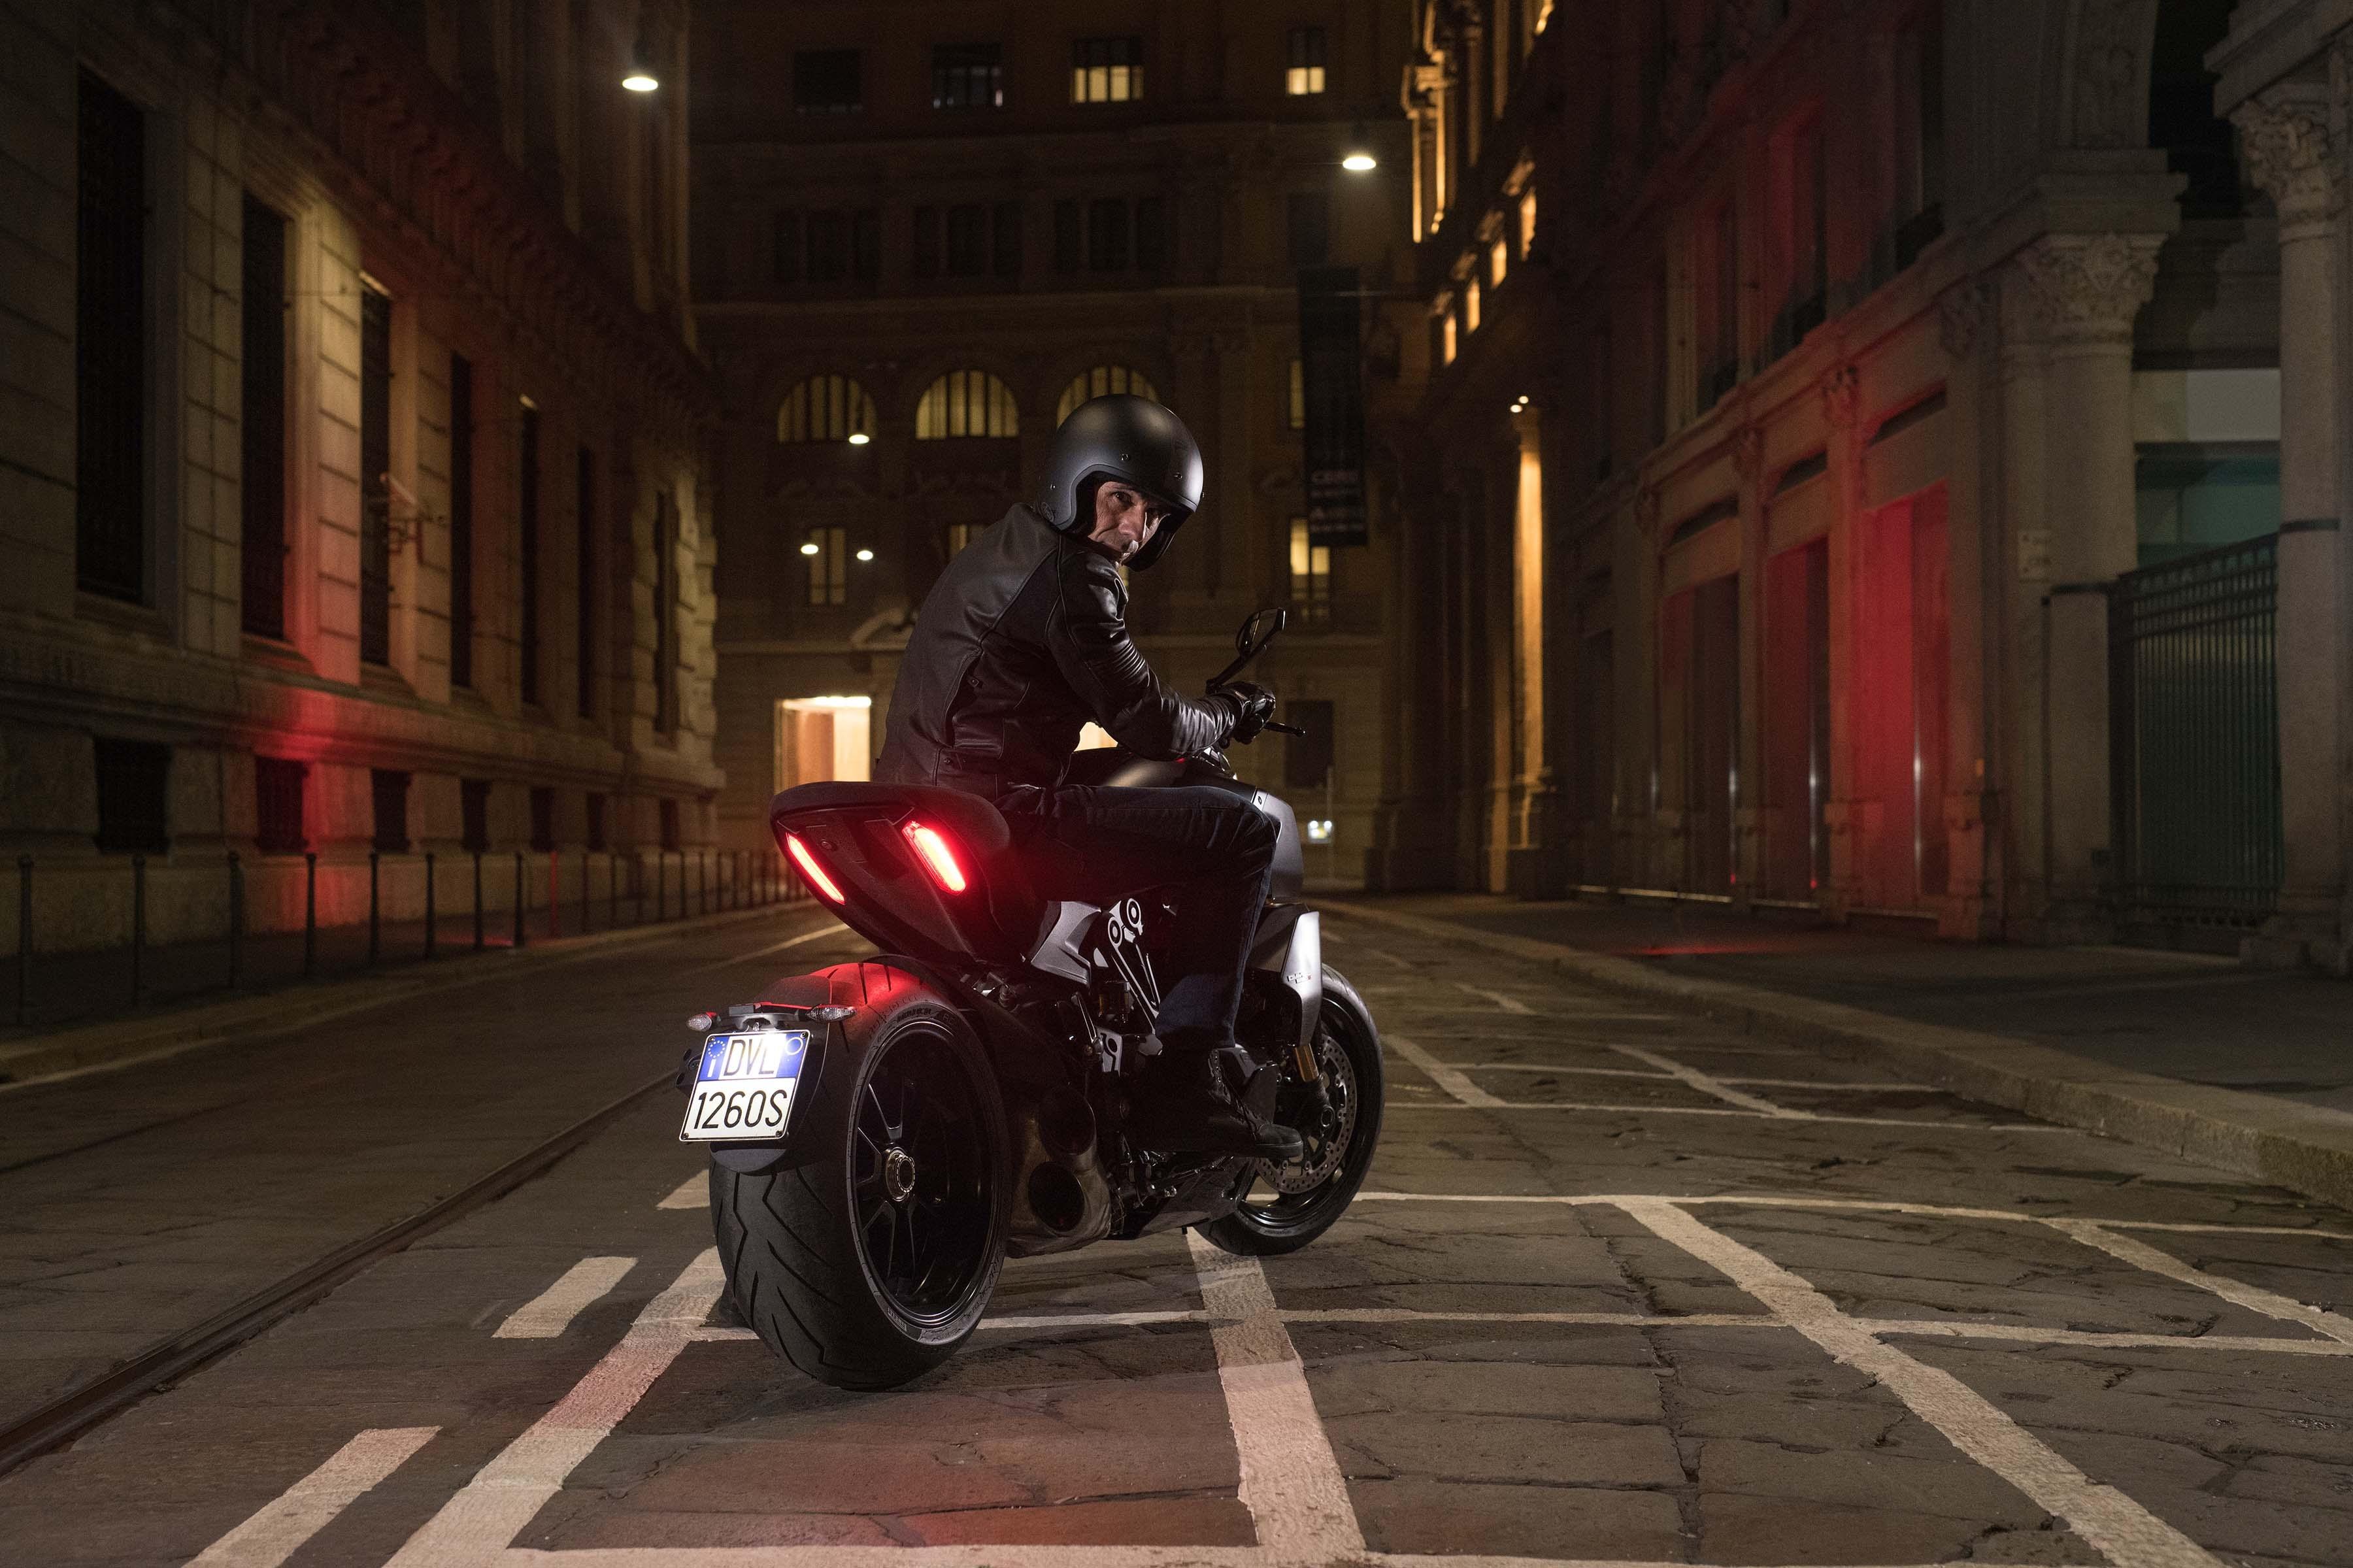 The All New Ducati Diavel 1260 Is One Mean Looking Cruiser